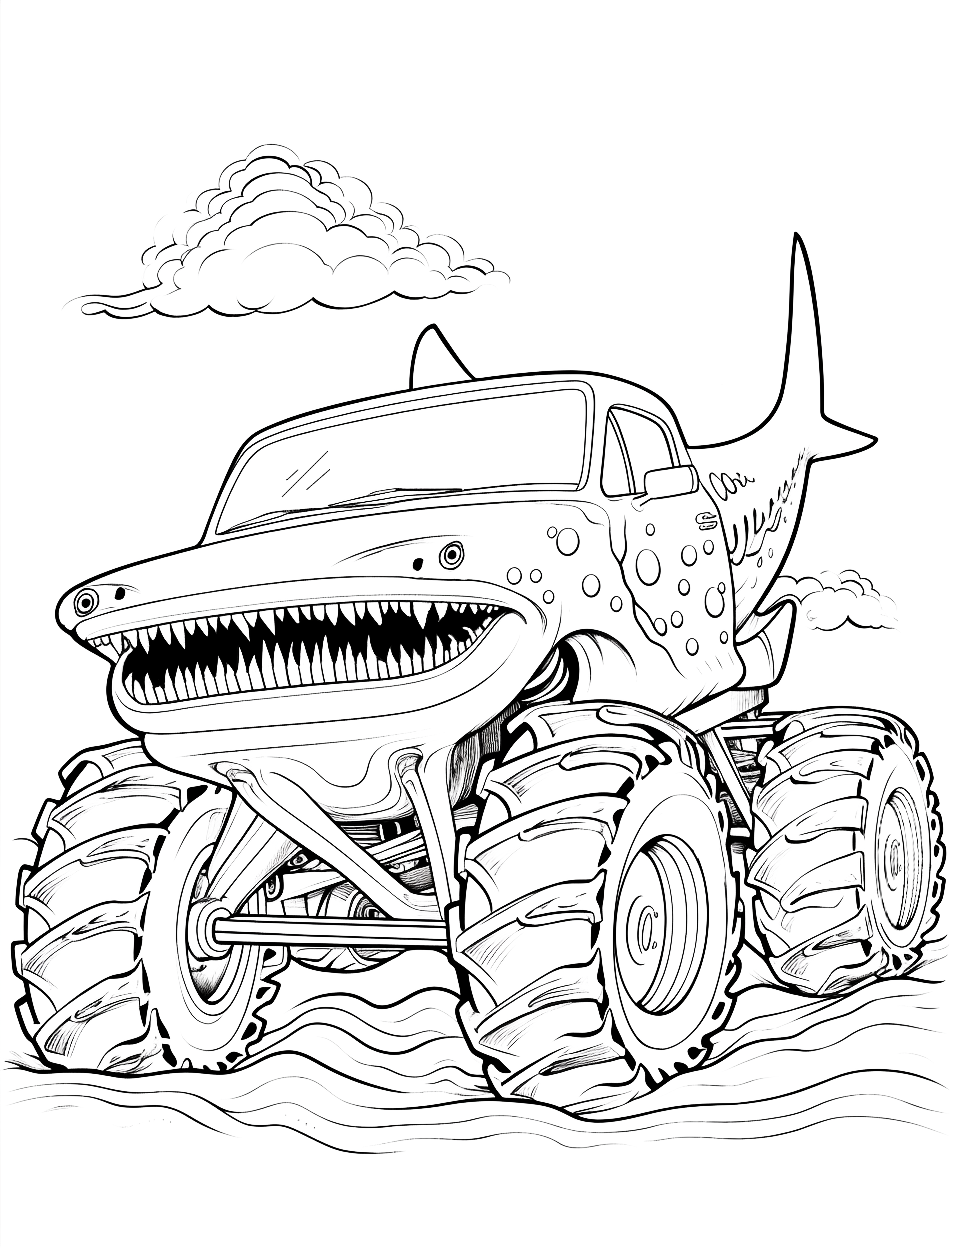 Shark Truck Monster Coloring Page - A monster truck with shark-like features racing.